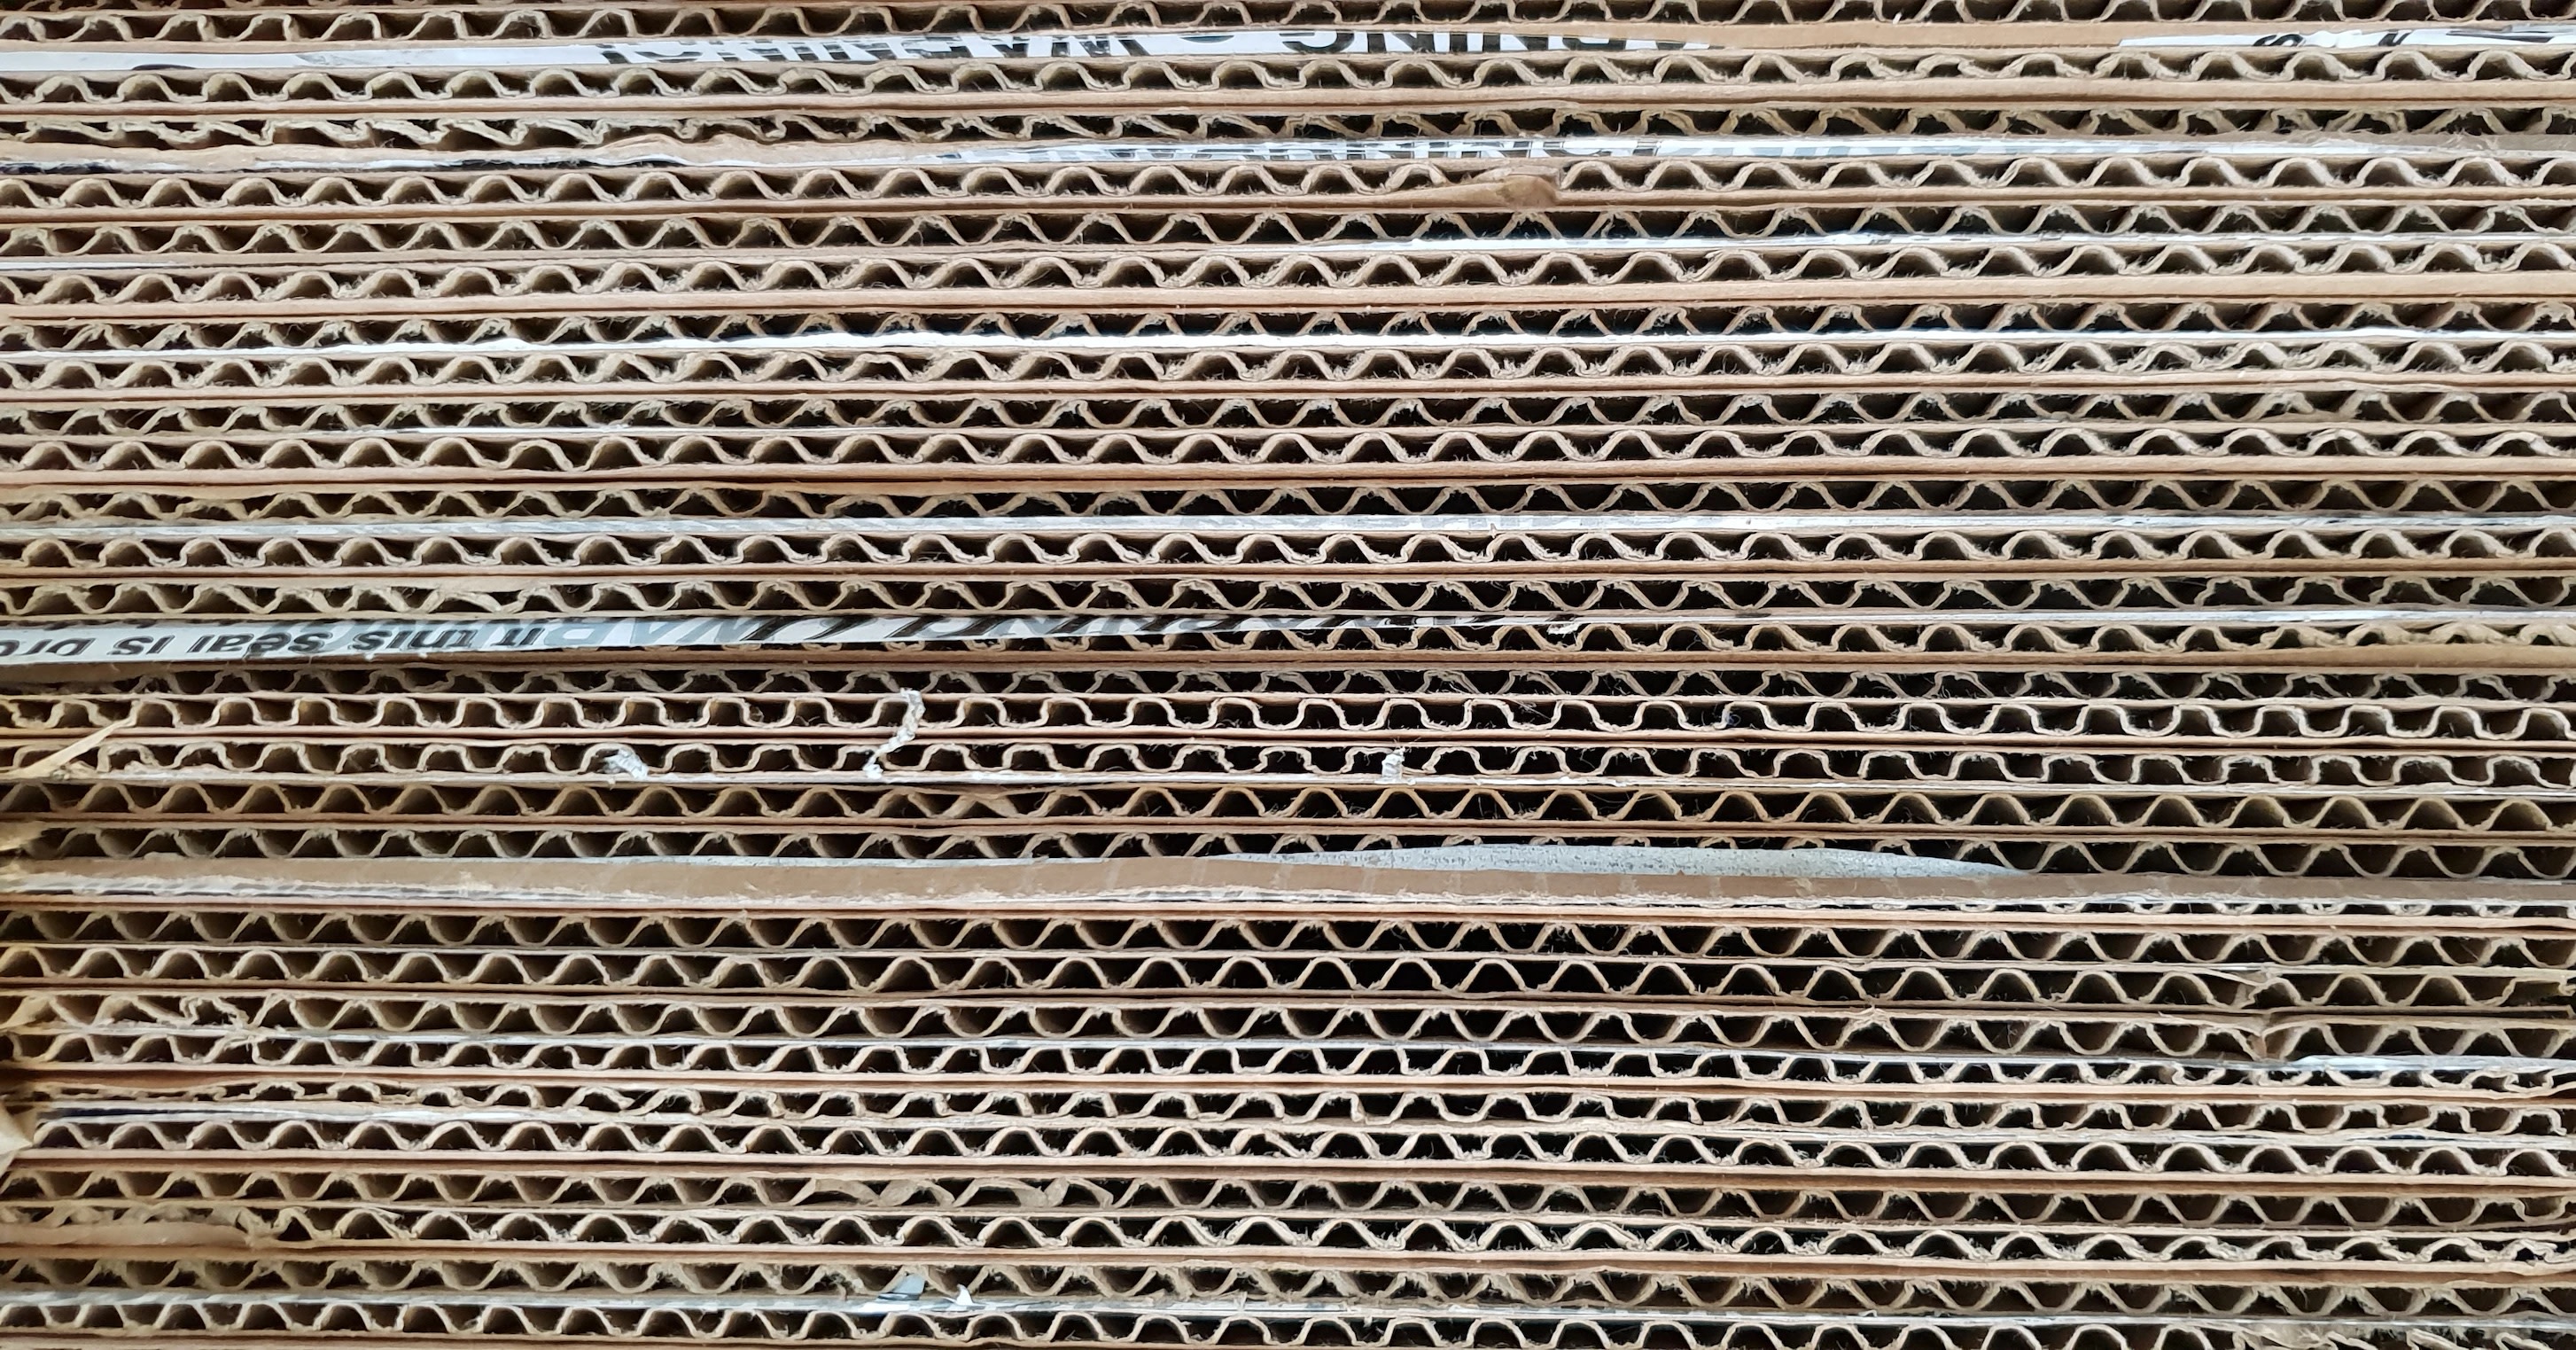 Image of stacked corrugated cardboard packing materials